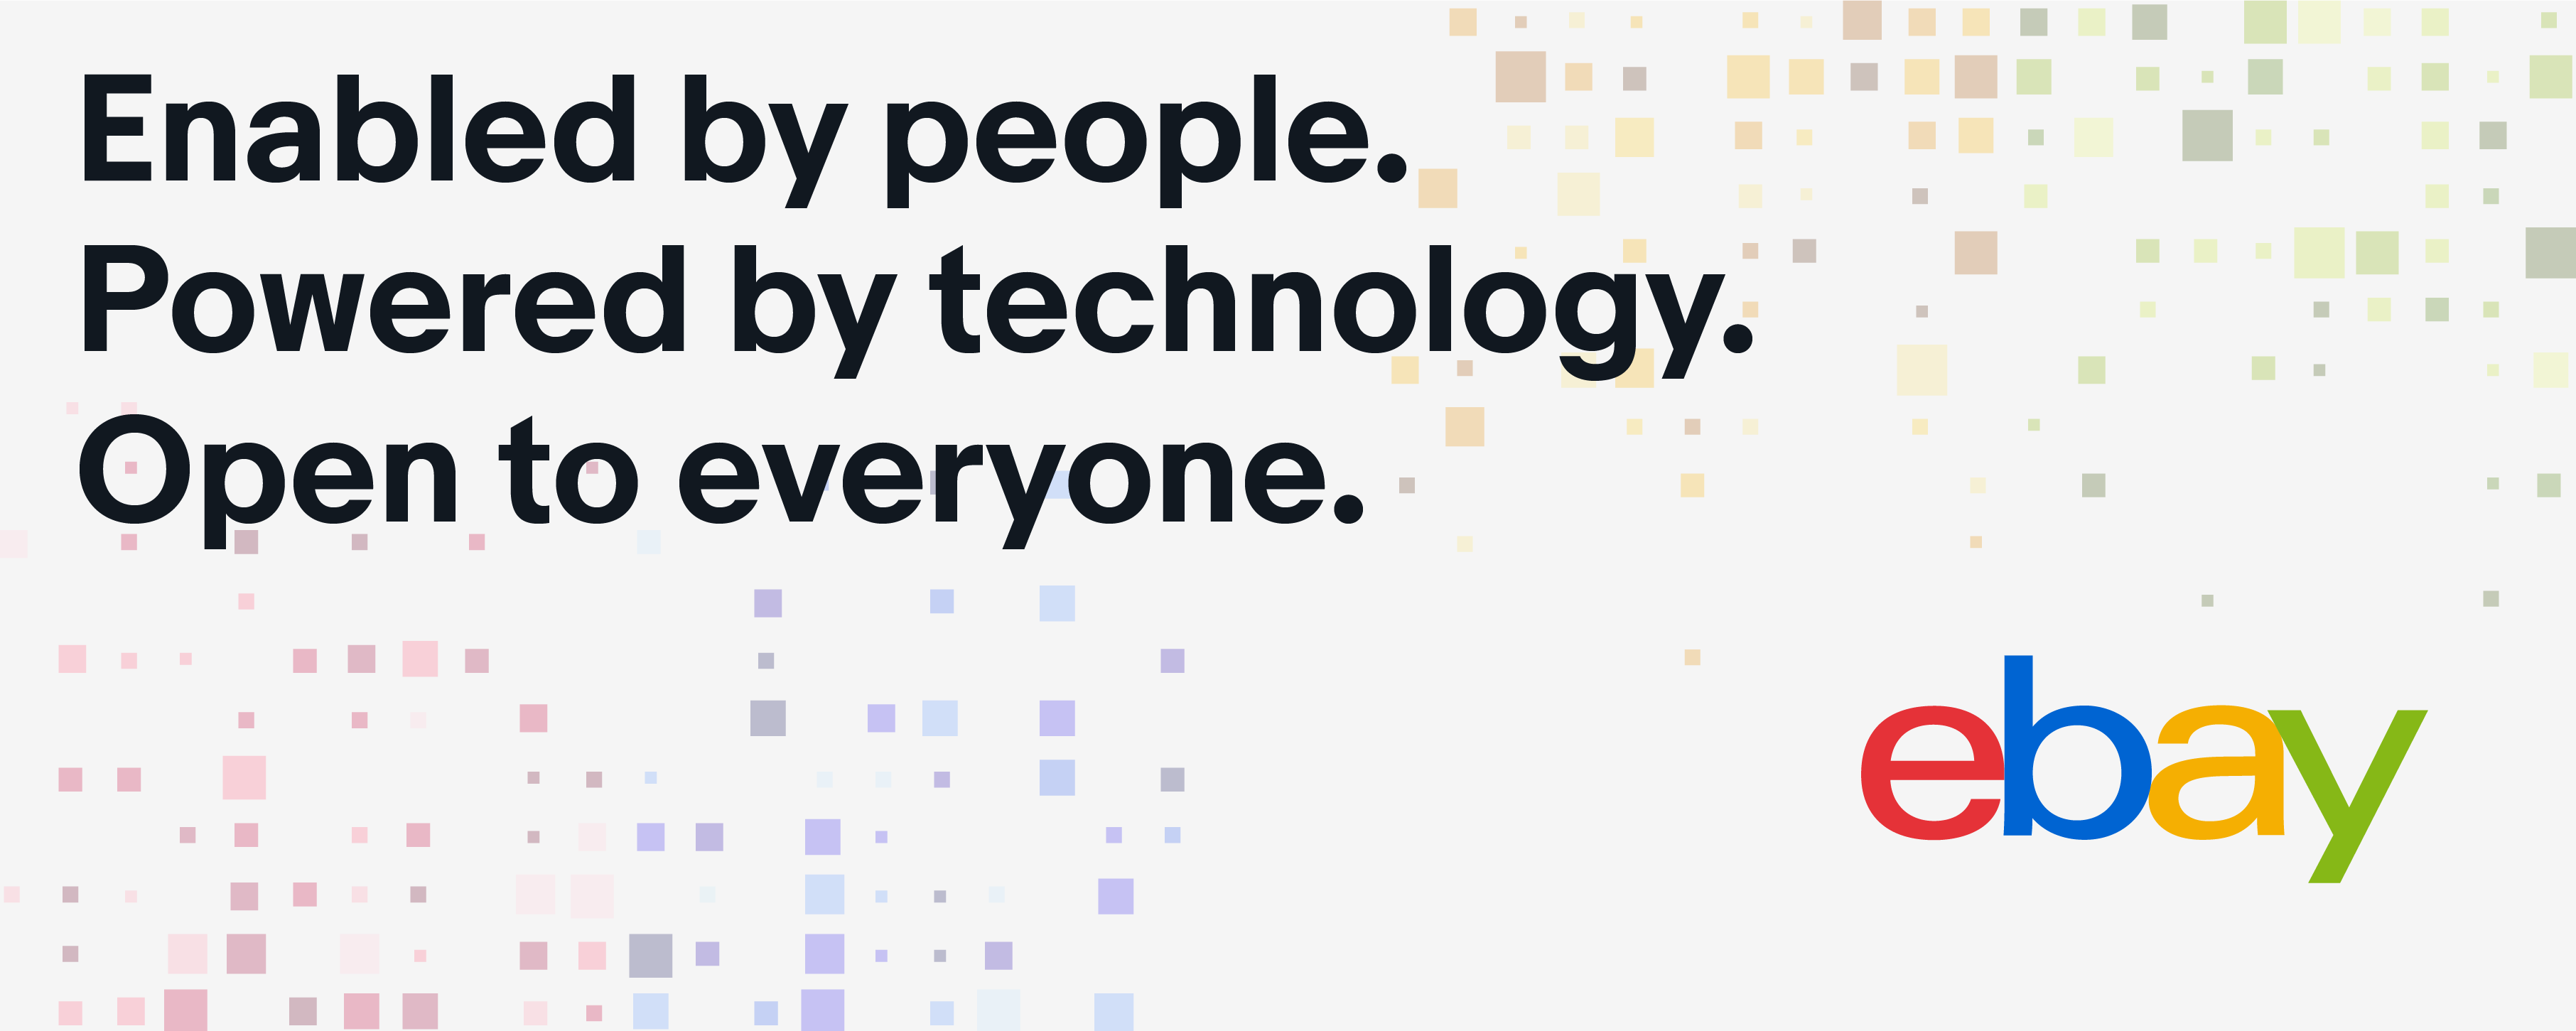 Enabled by people. Powered by technology. Open to everyone.